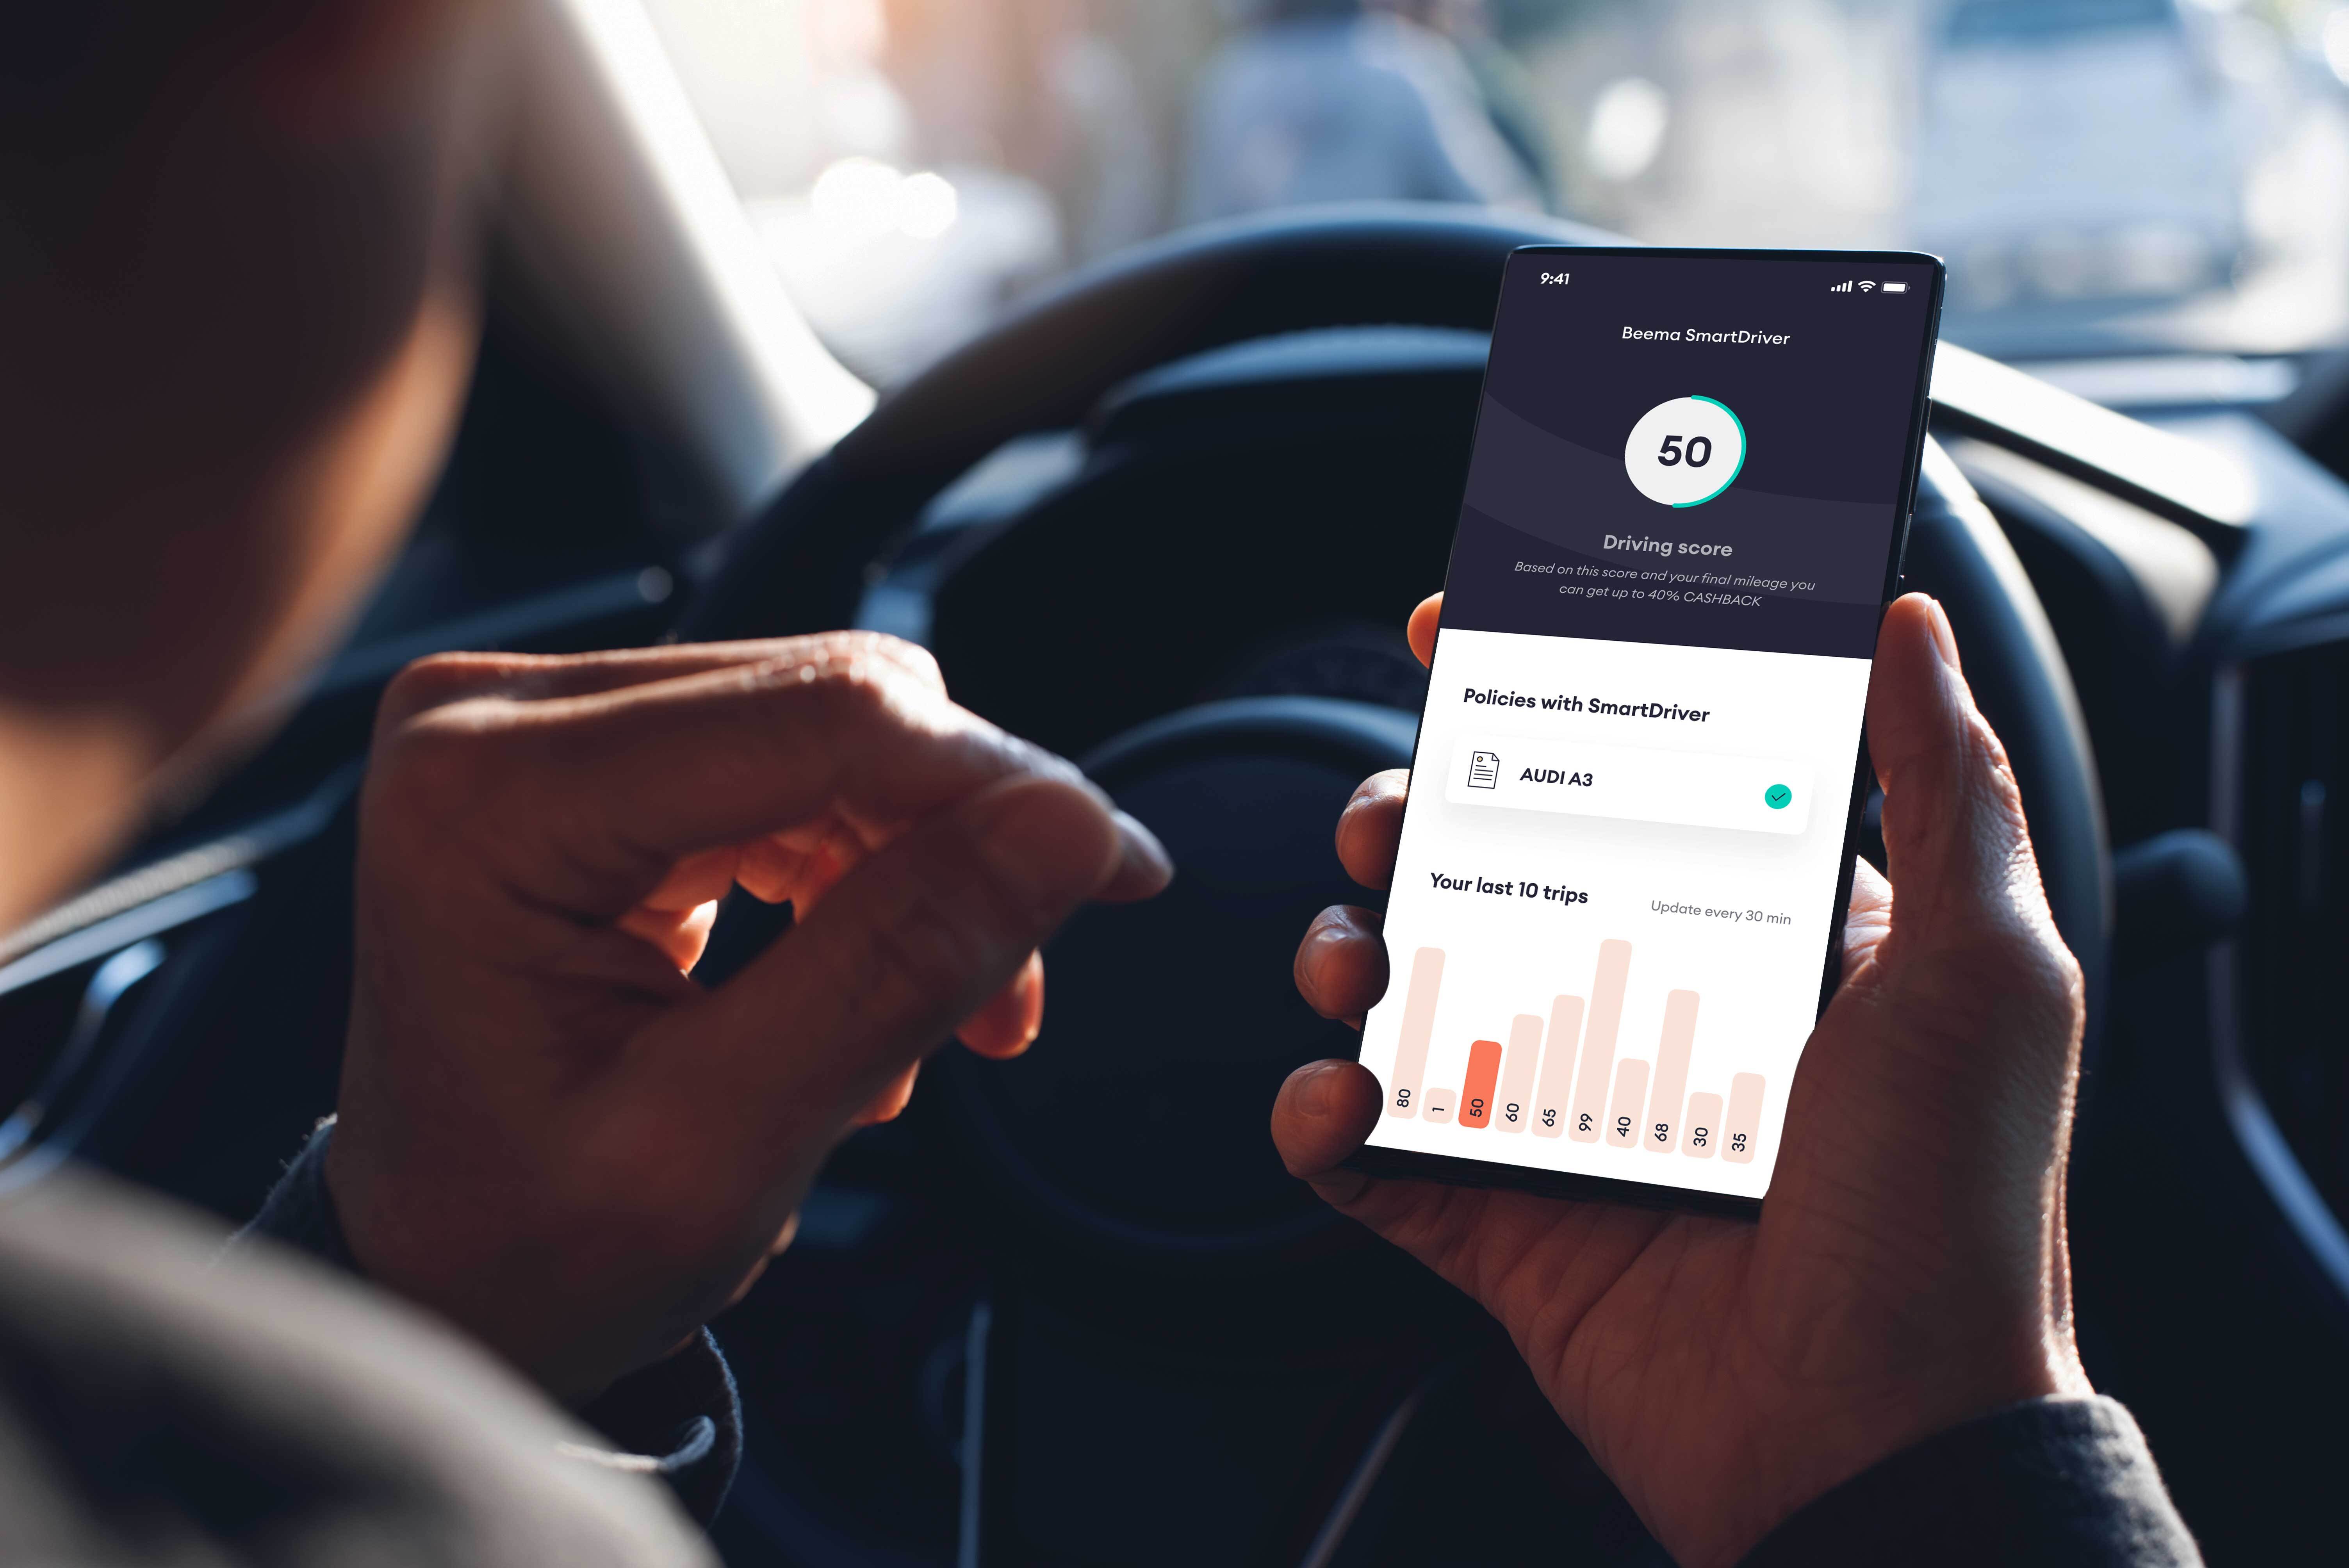 Beema launches SmartDriver car insurance that rewards users for safer driving